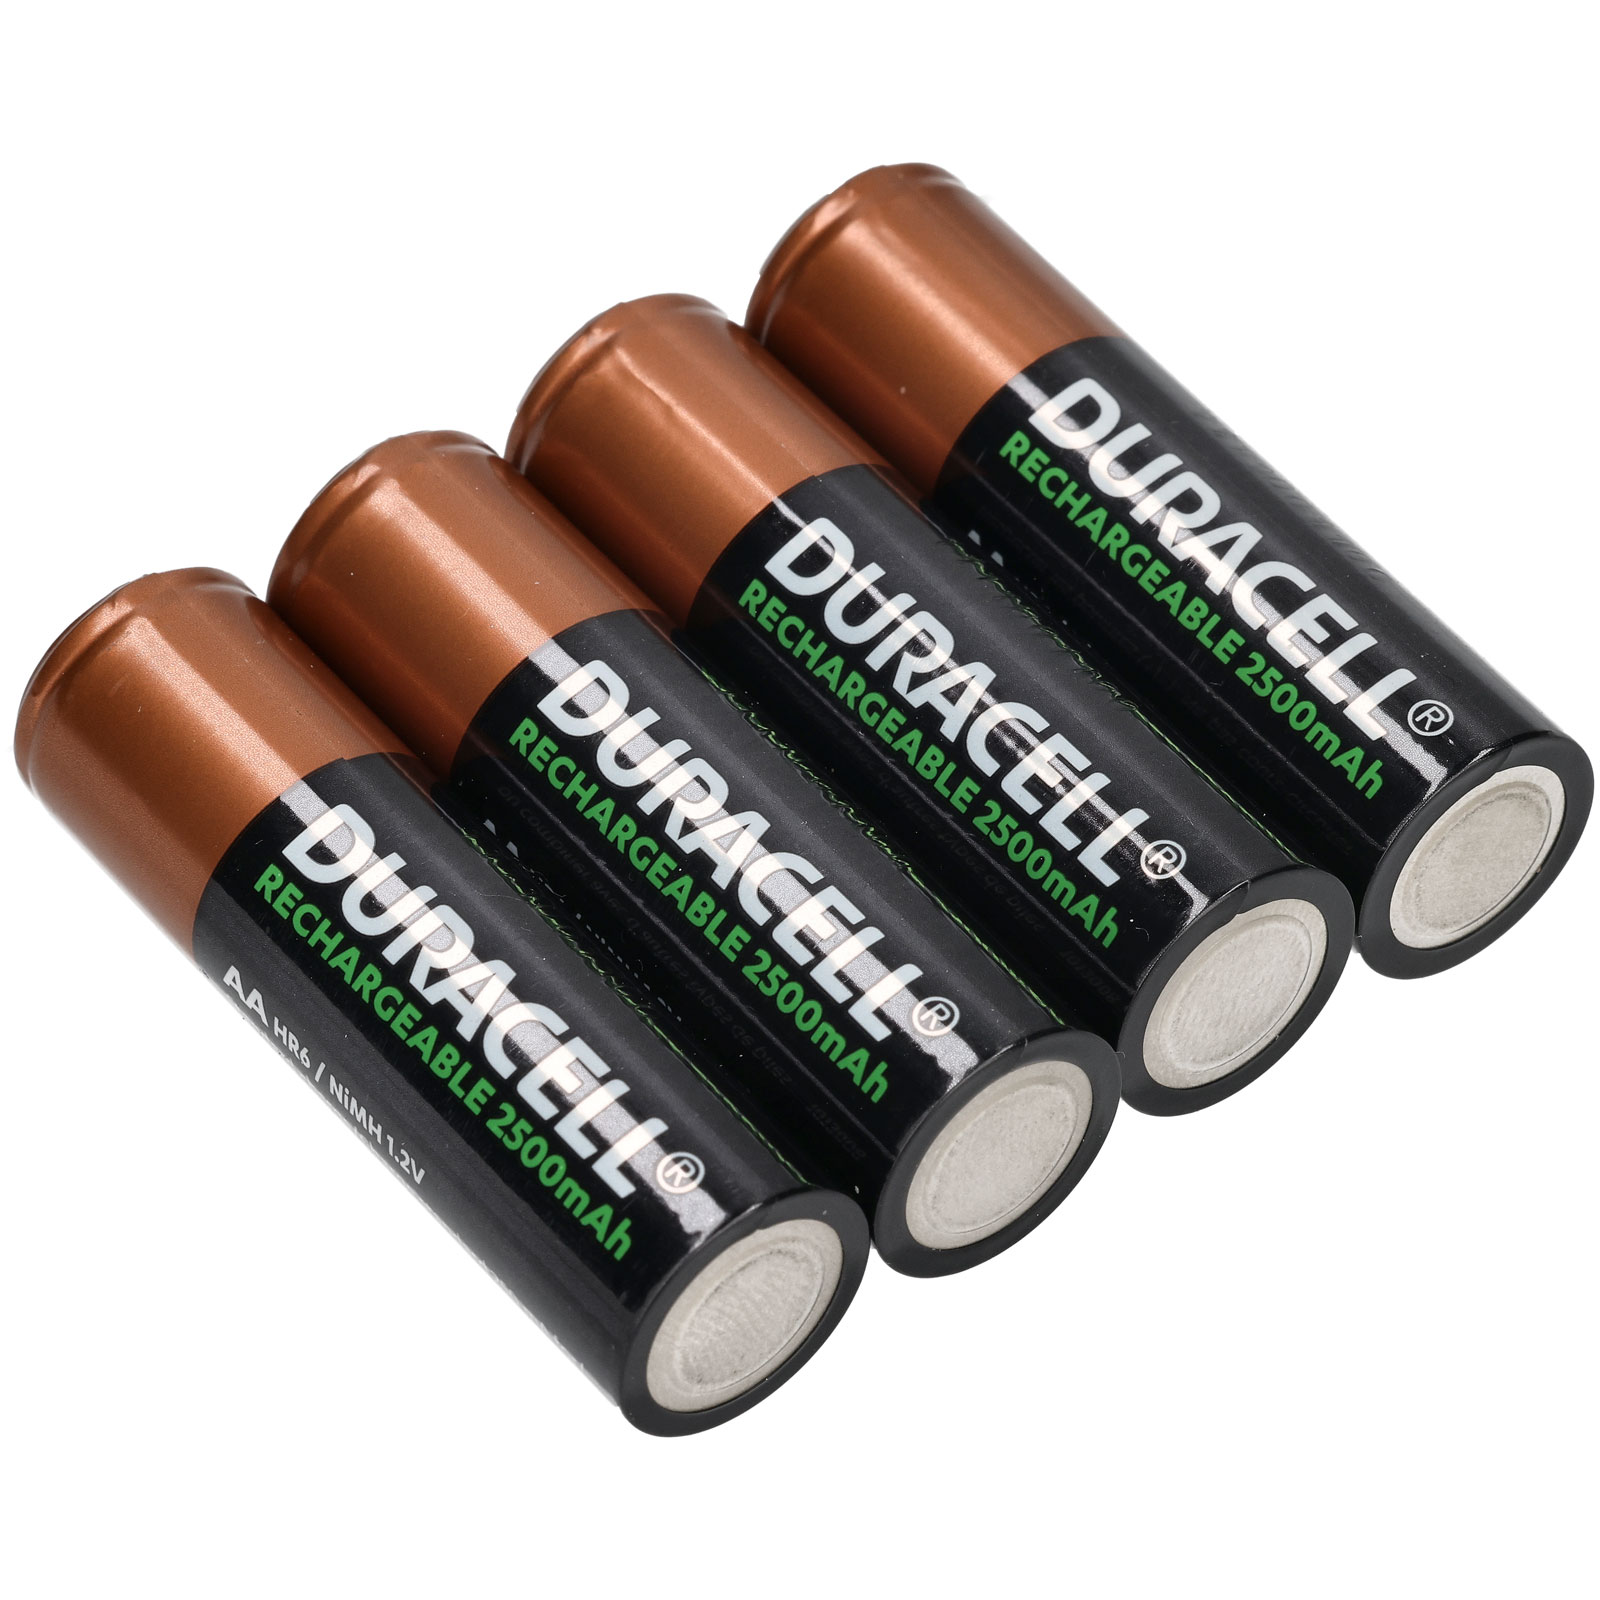 aa rechargeable batteries in Rechargeable Batteries 